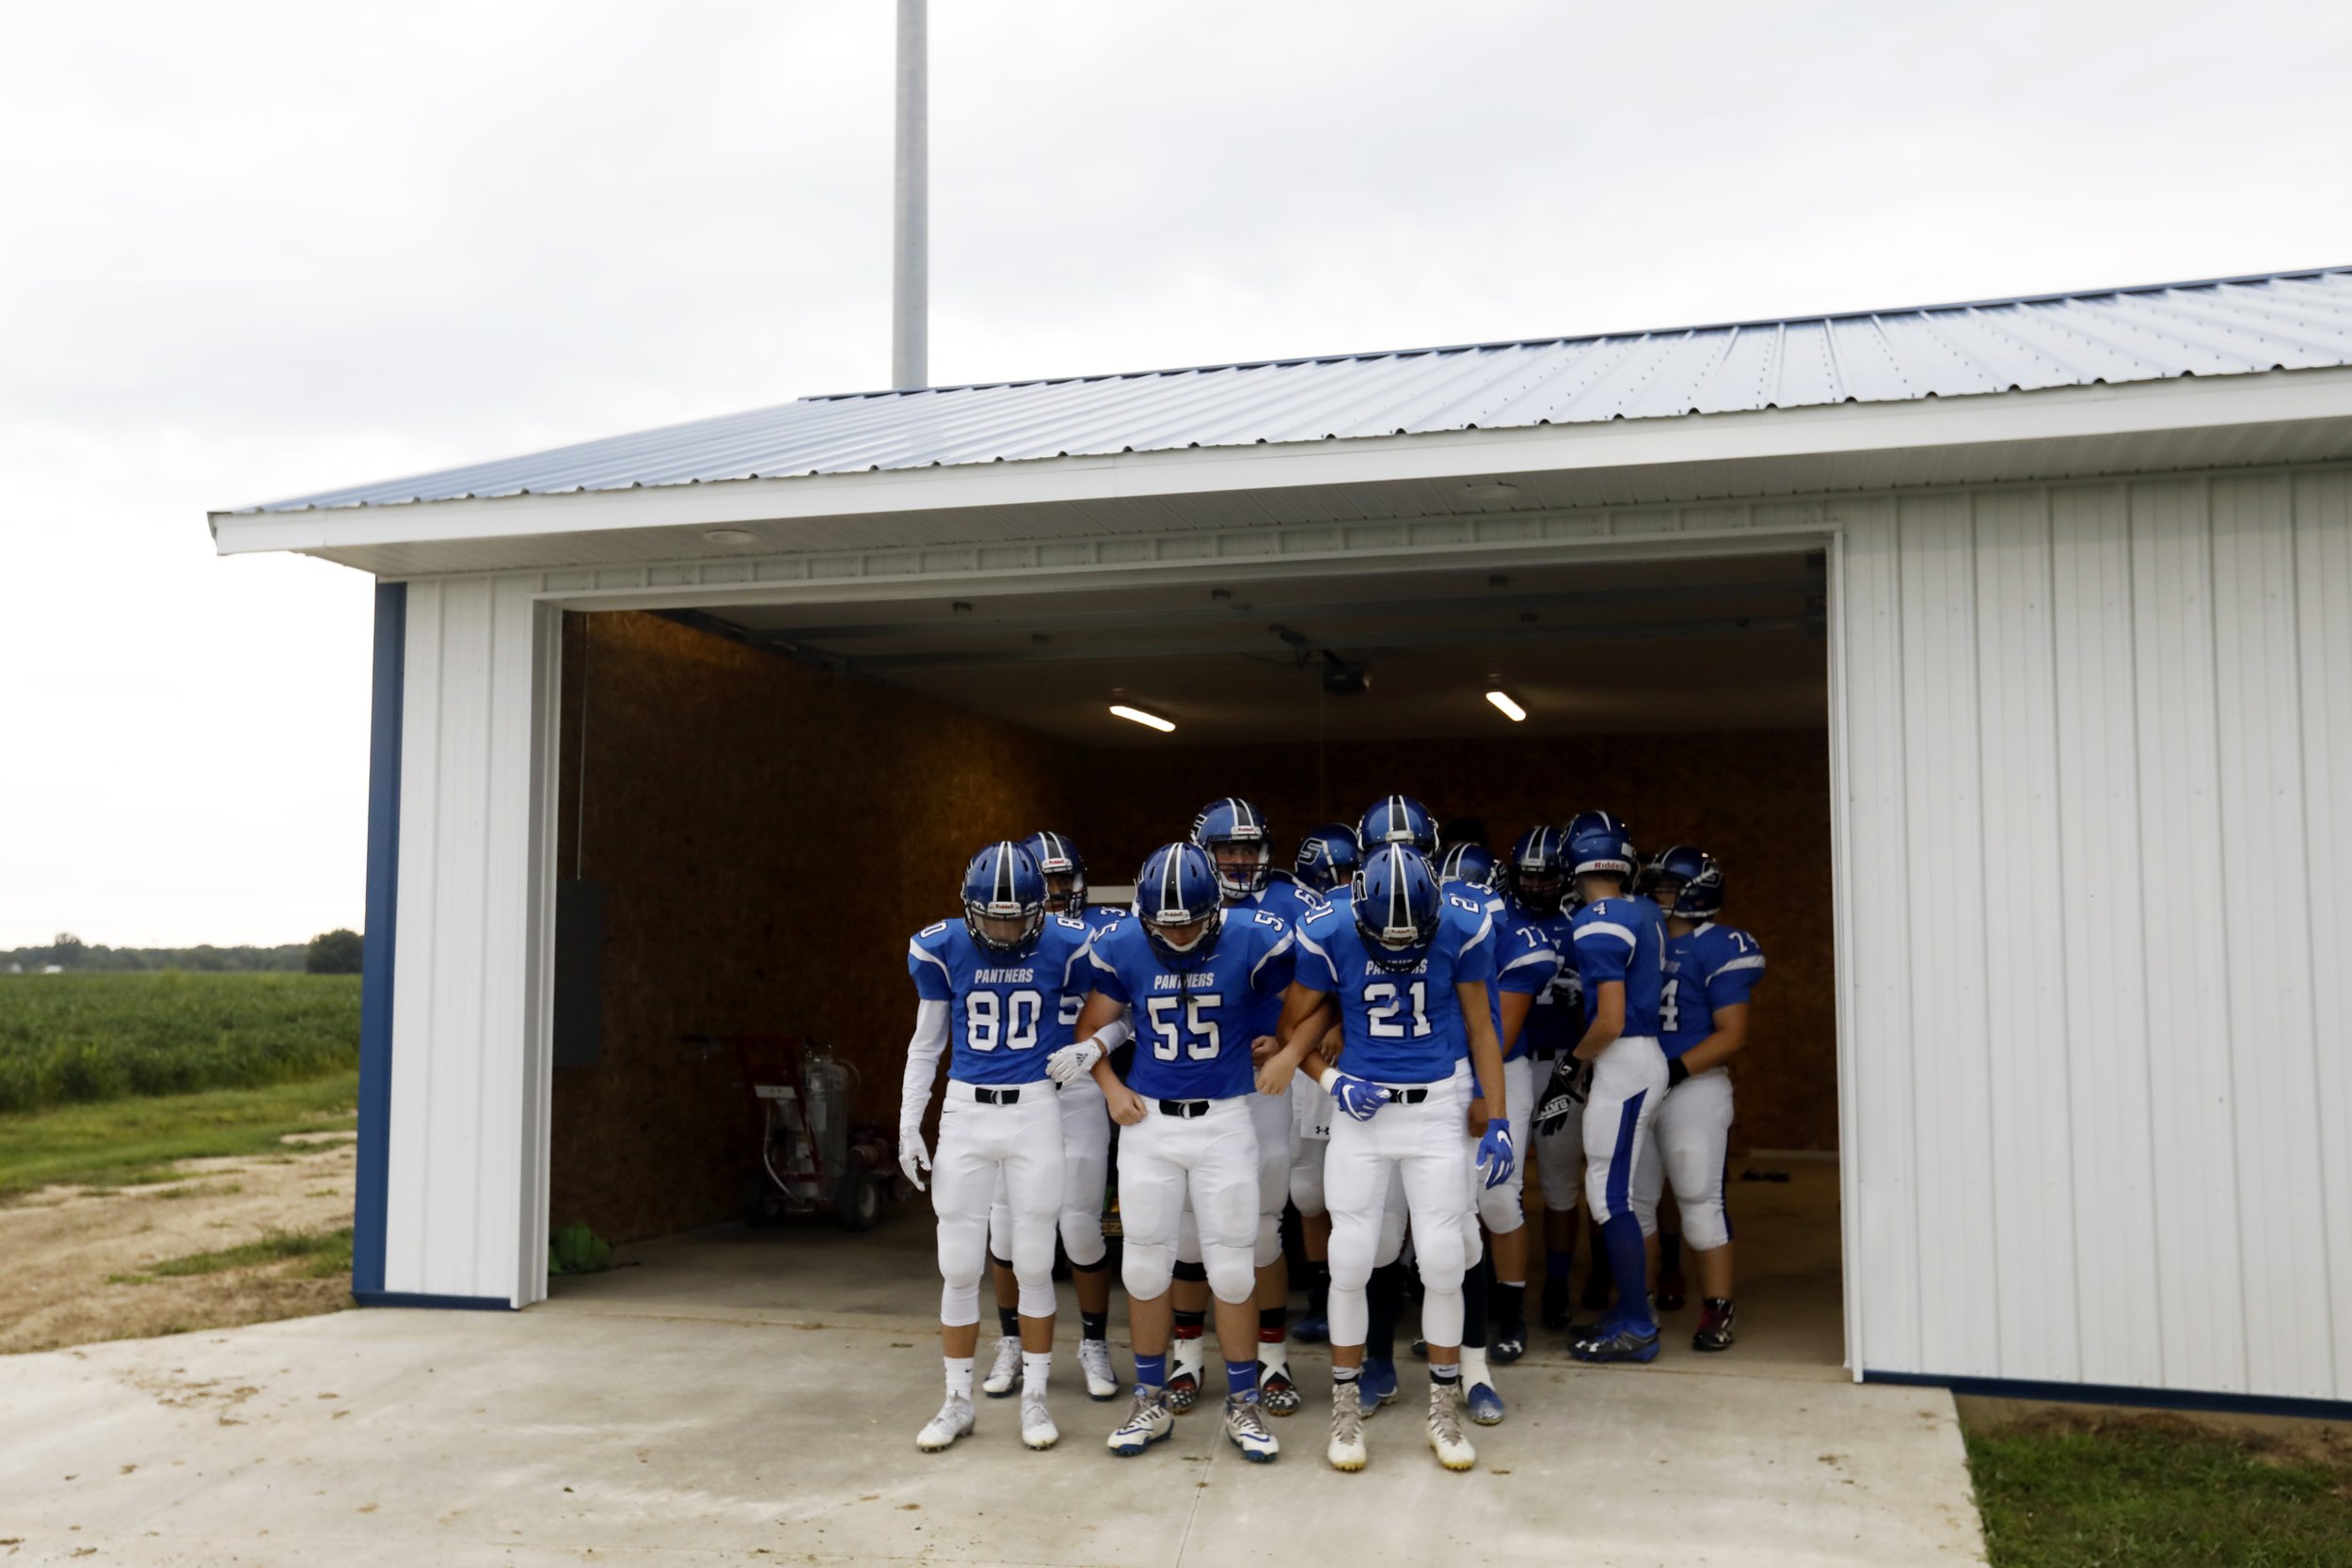  The Stryker football team is led by Max Wonders (80) Alex Grice (55) and Wyatt Short (21) as they take the field for their season home opener Friday, August 24, 2018. This was the first varsity game for the high school since 1931. The team began wit